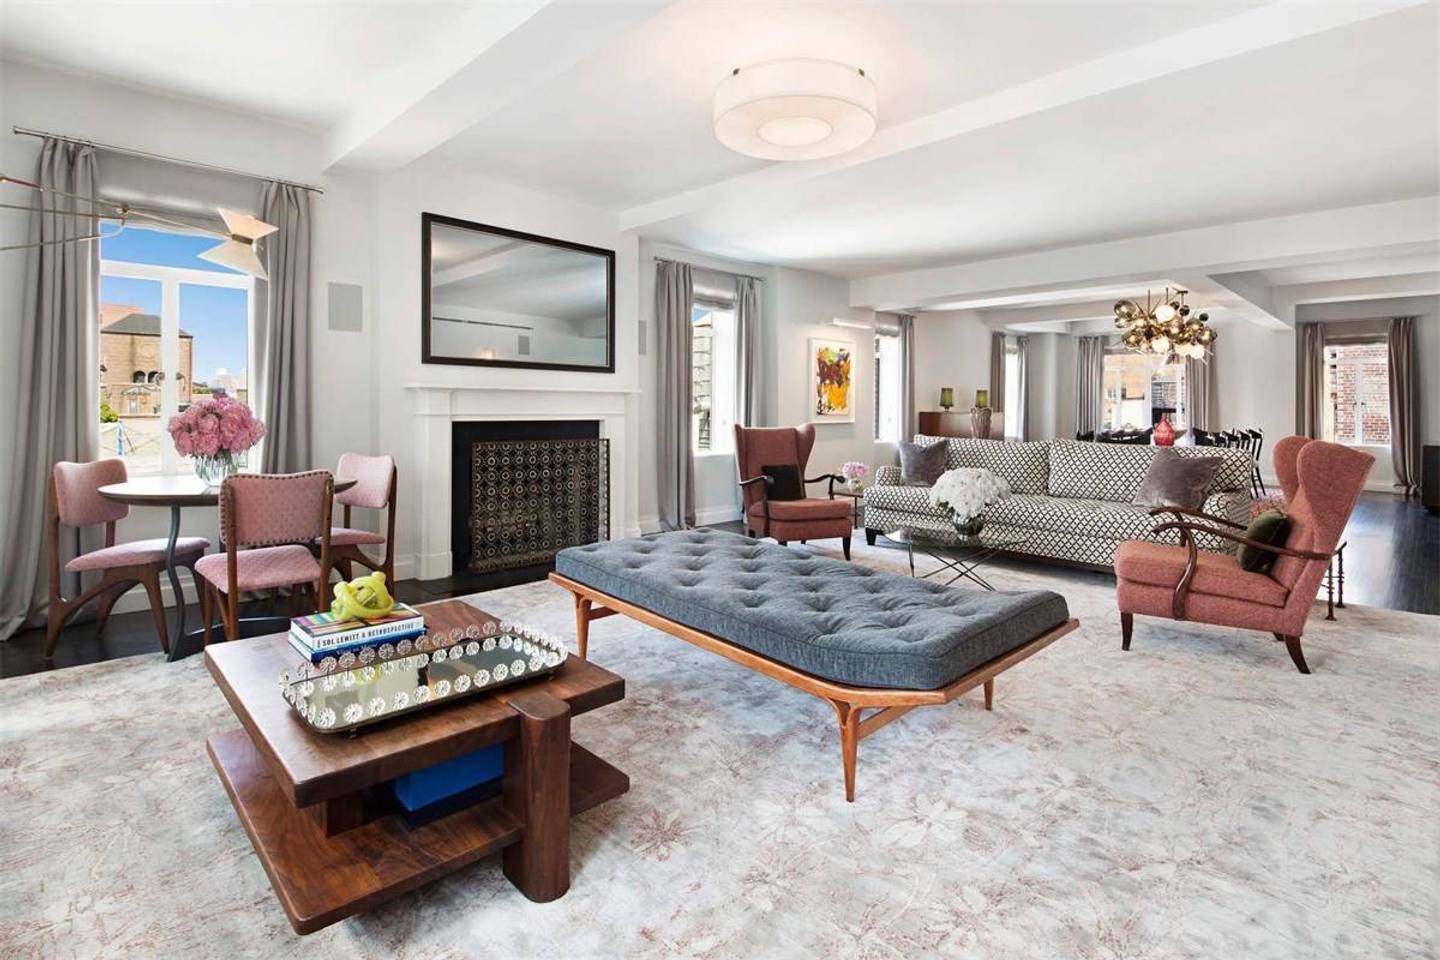 upscale new york apartment close to city attractions